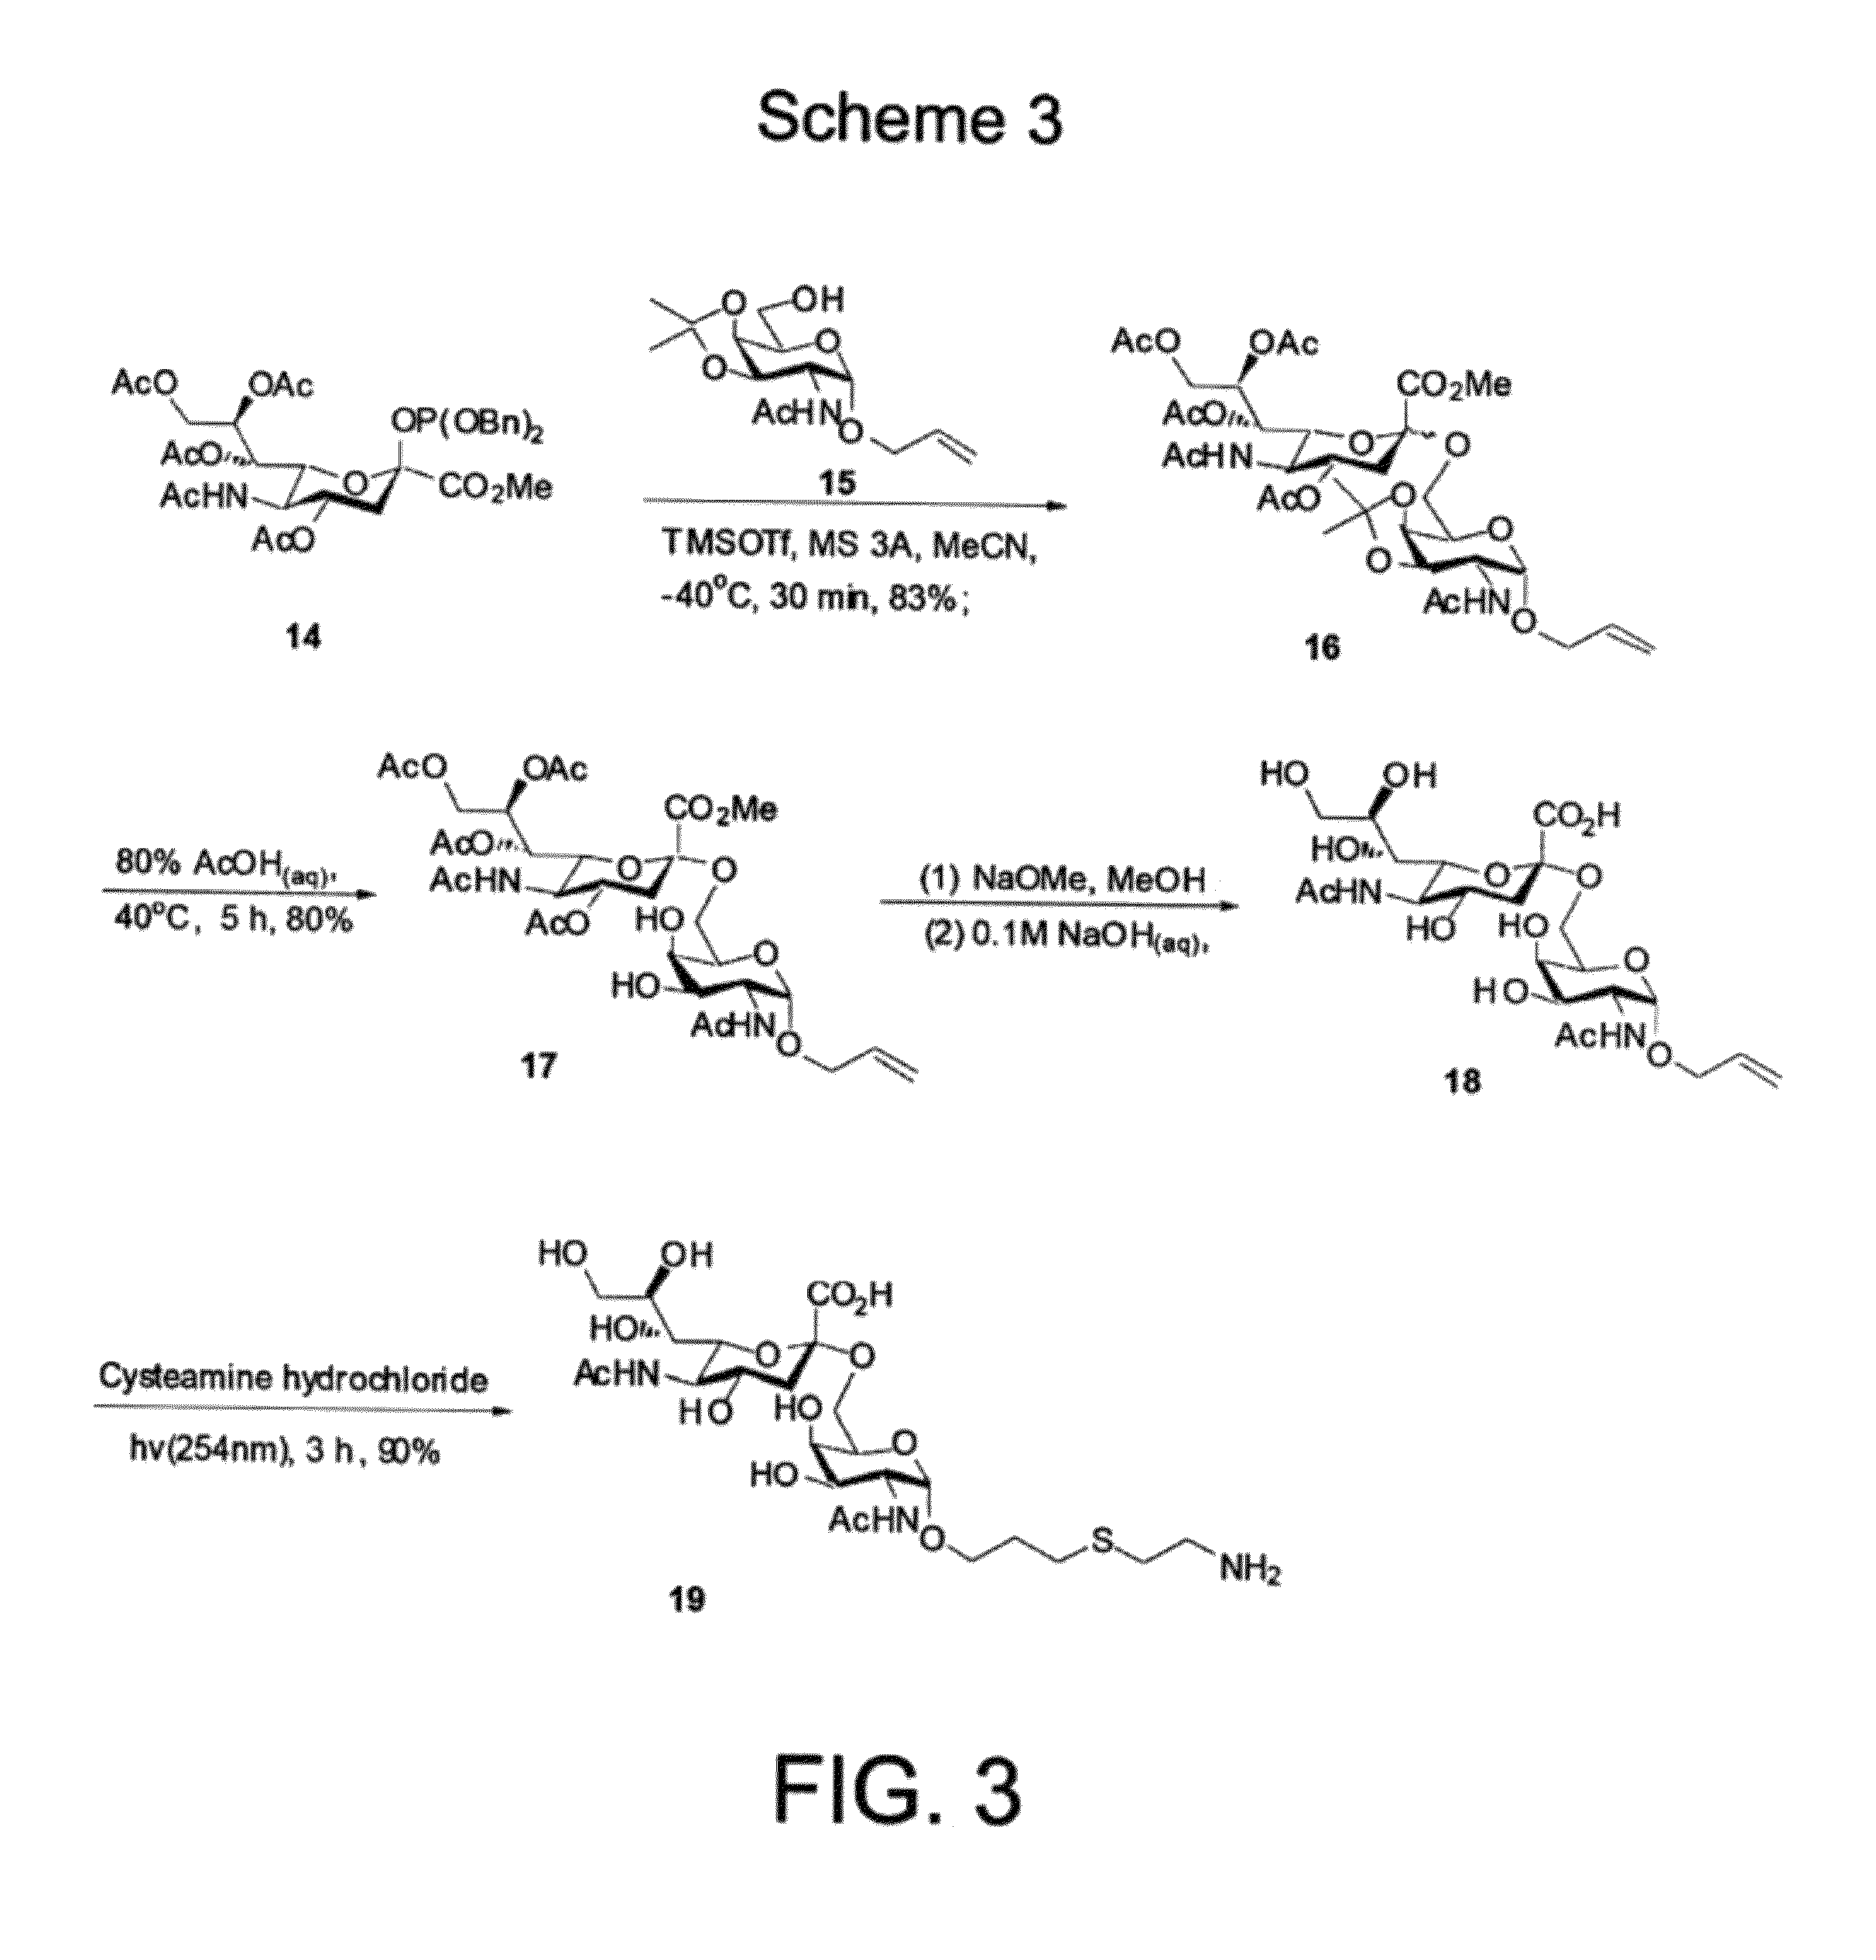 Immunogenic protein carrier containing an antigen presenting cell binding domain and a cysteine-rich domain